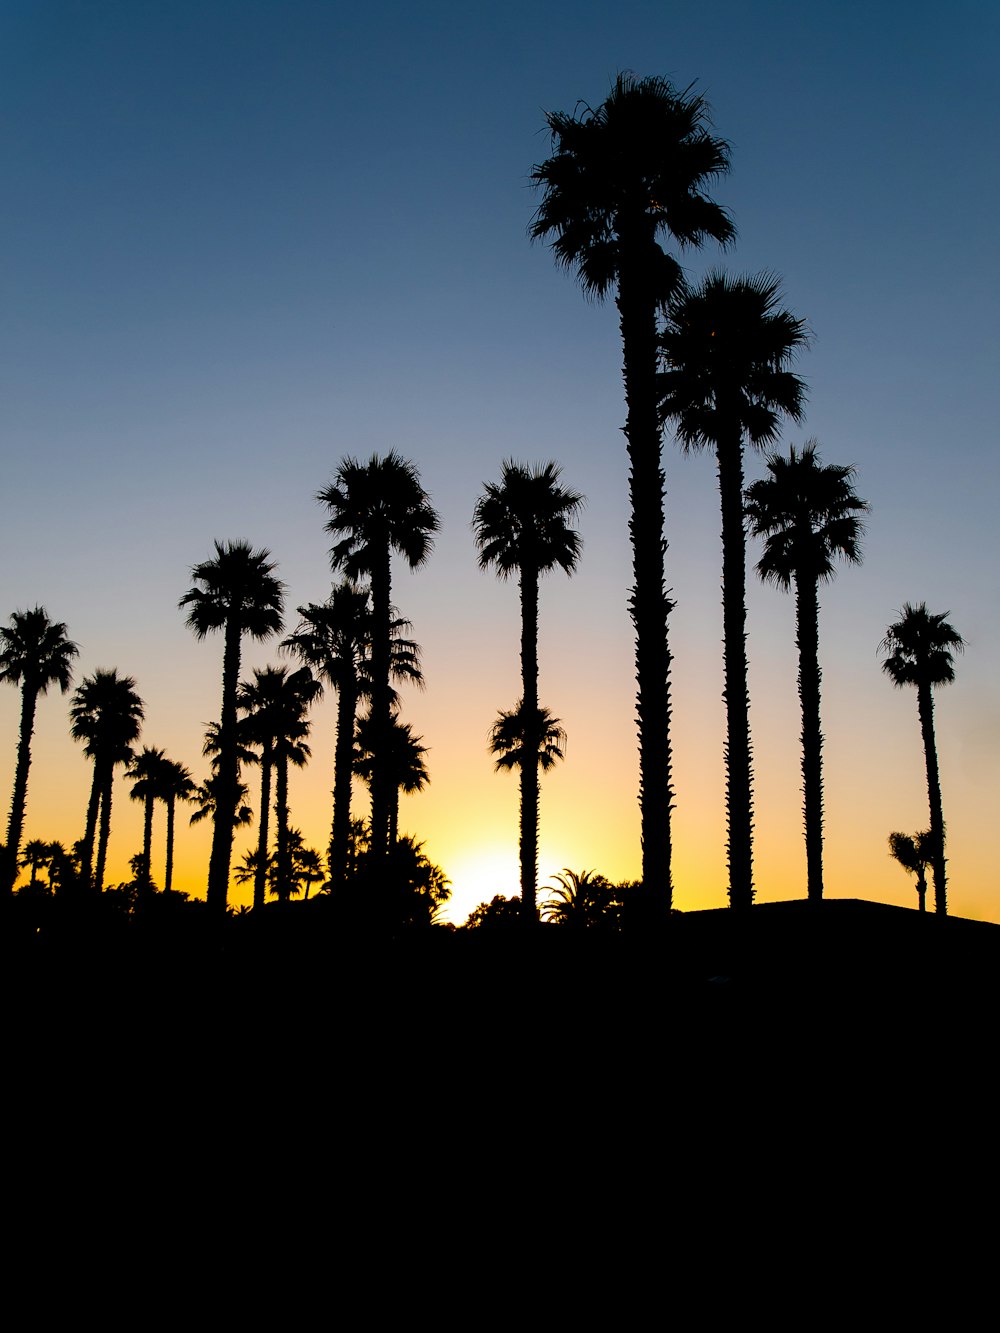 a group of palm trees silhouetted against a sunset